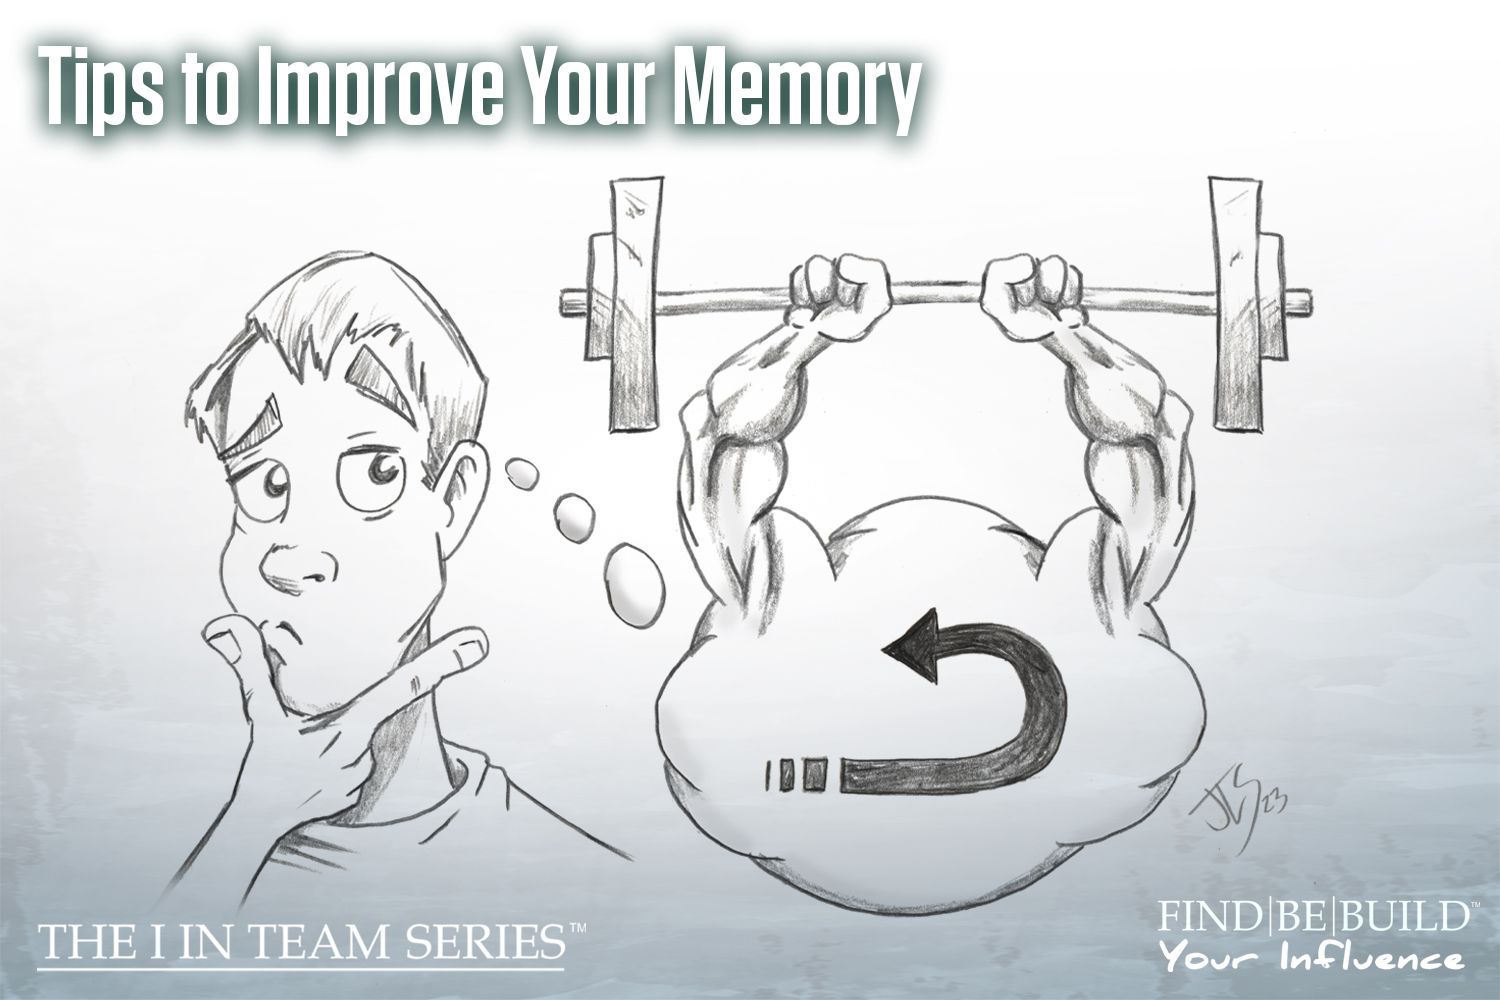 Tips to Improve Your Memory